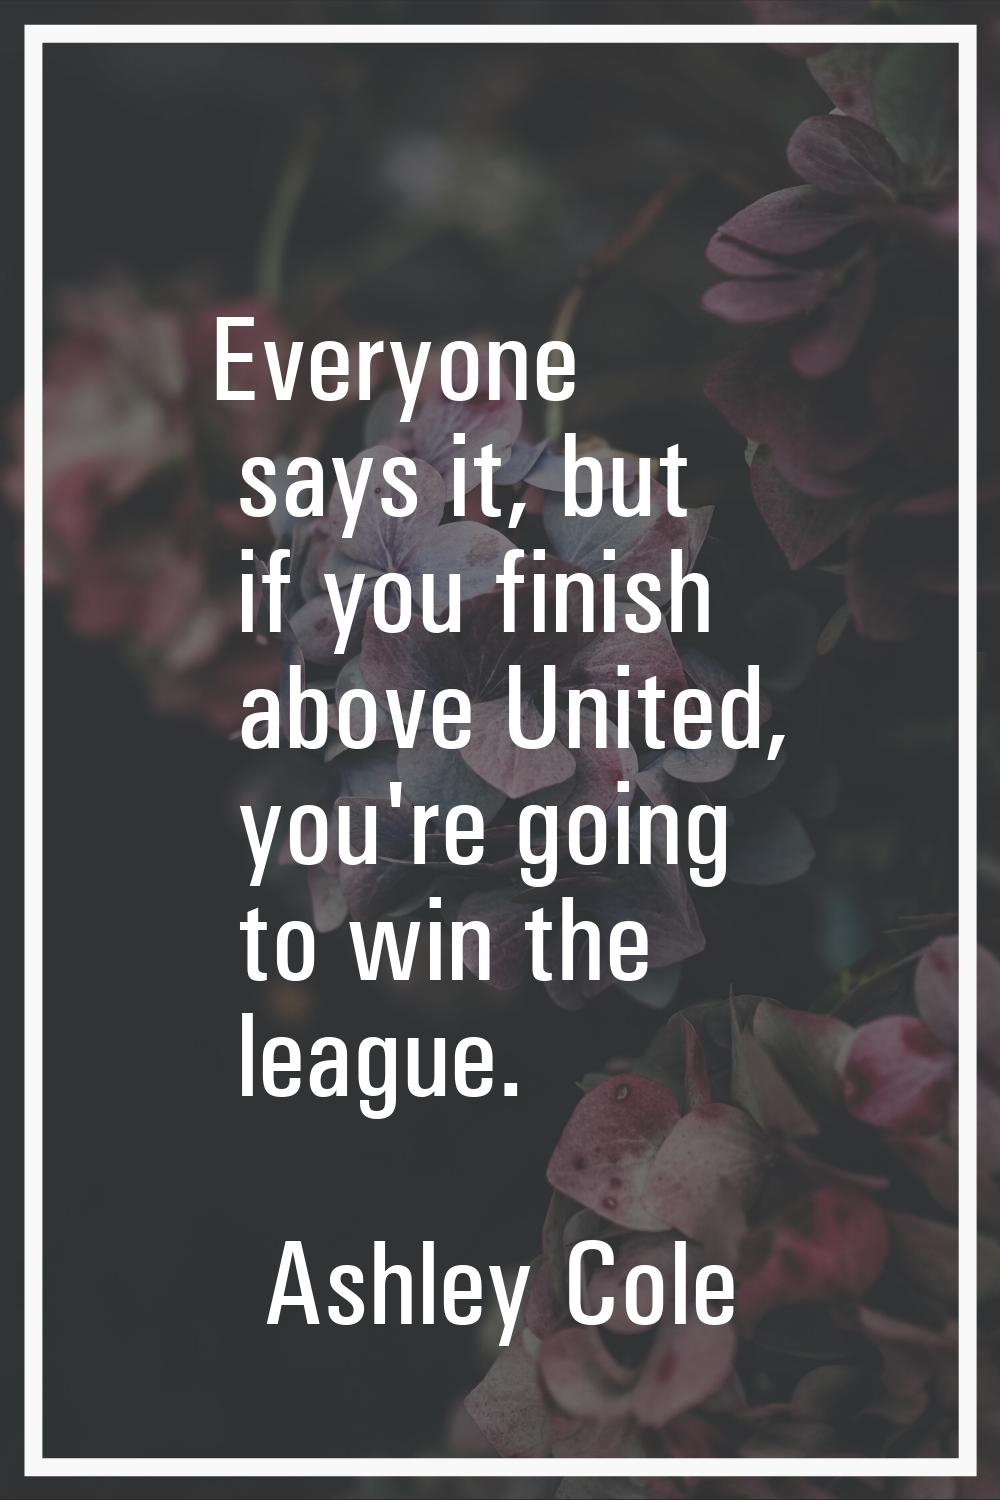 Everyone says it, but if you finish above United, you're going to win the league.